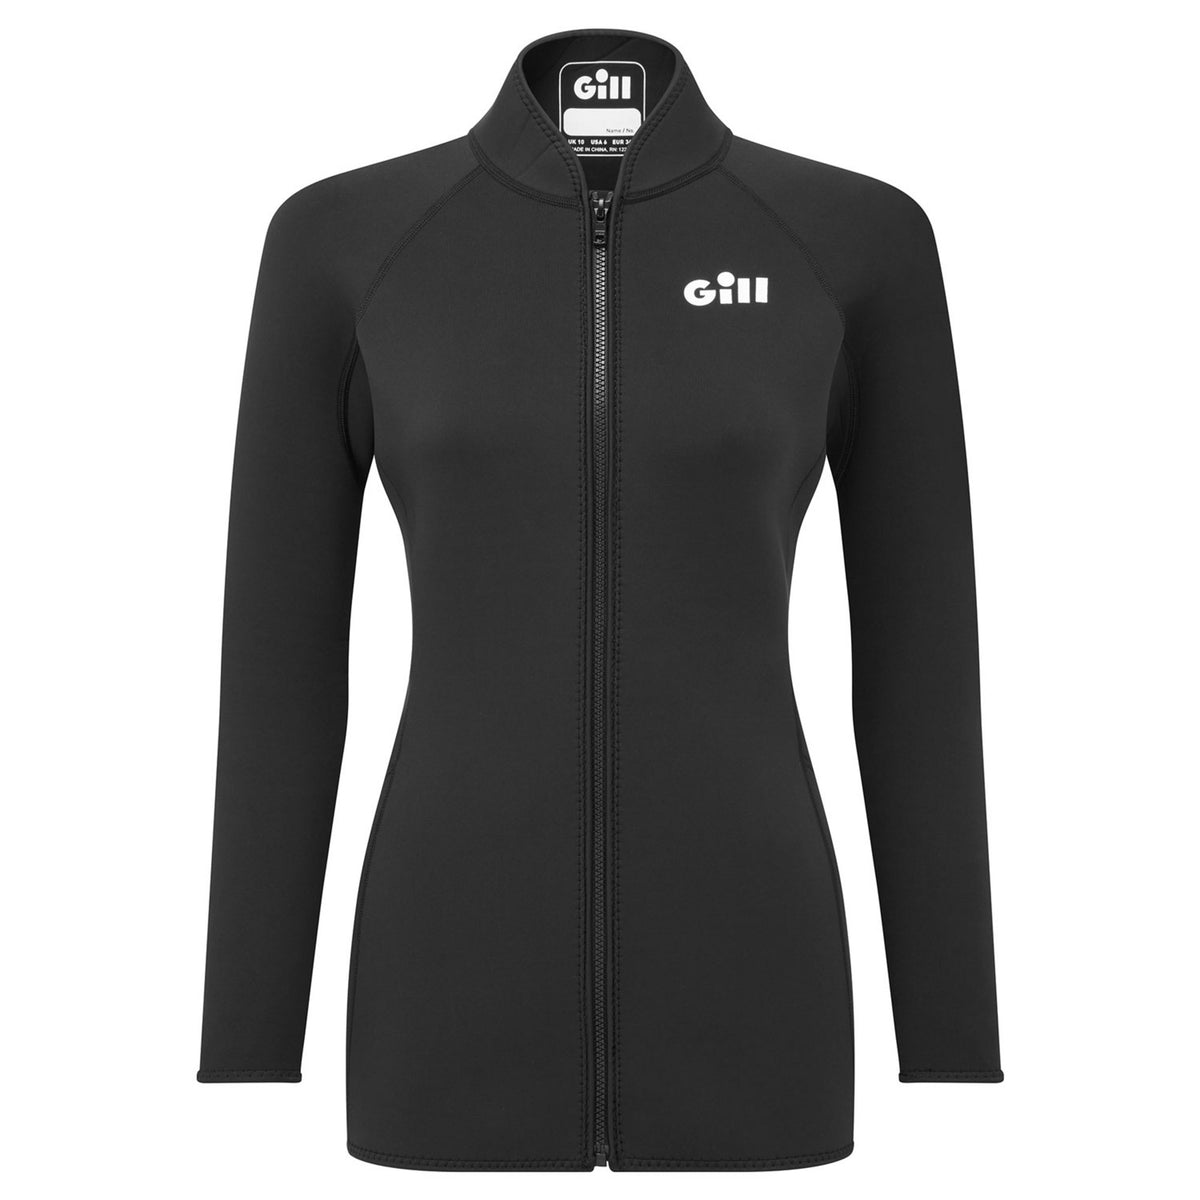 GILL Womens Pursuit Neoprene Jacket from GILL - CHAOS Fishing